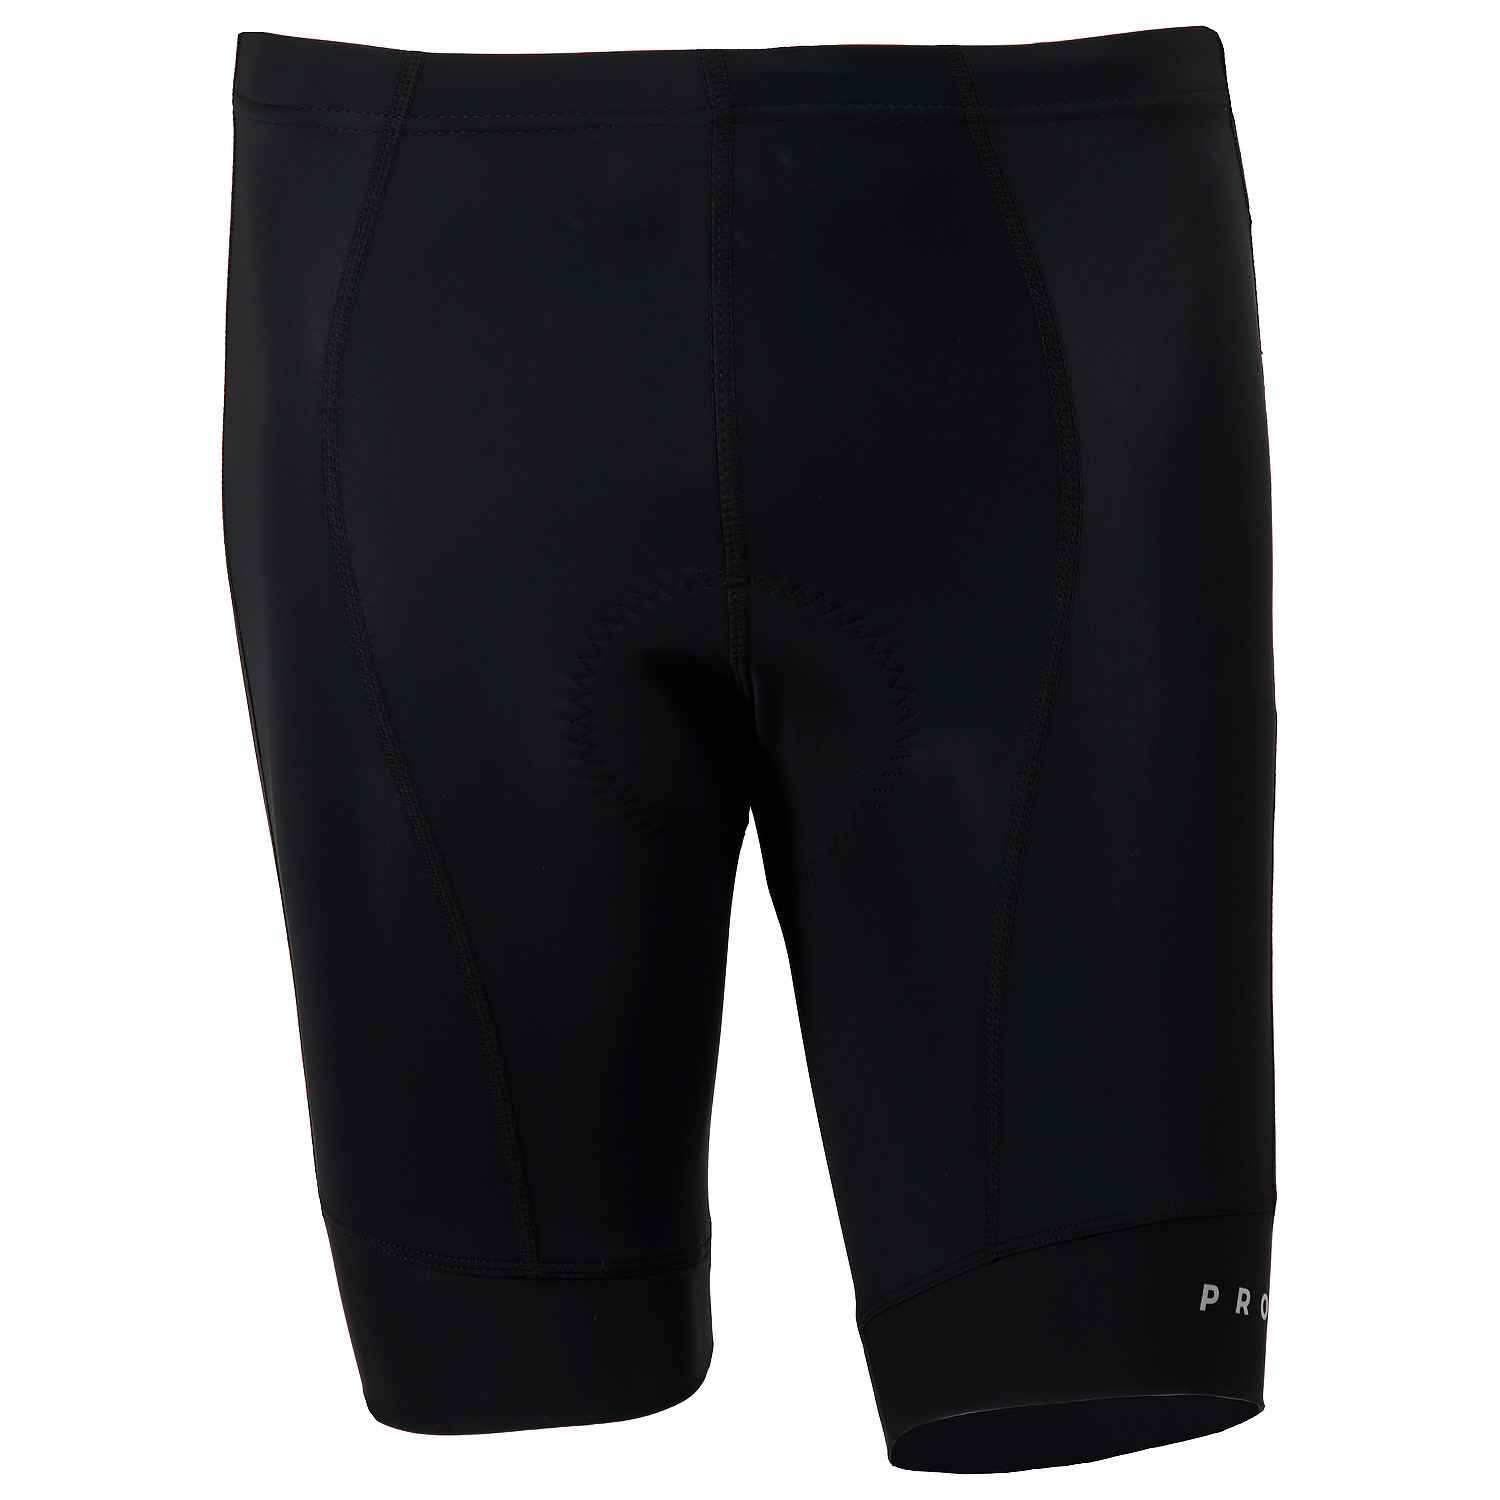 Men's Pro Elite Cycling Shorts - First Ascent